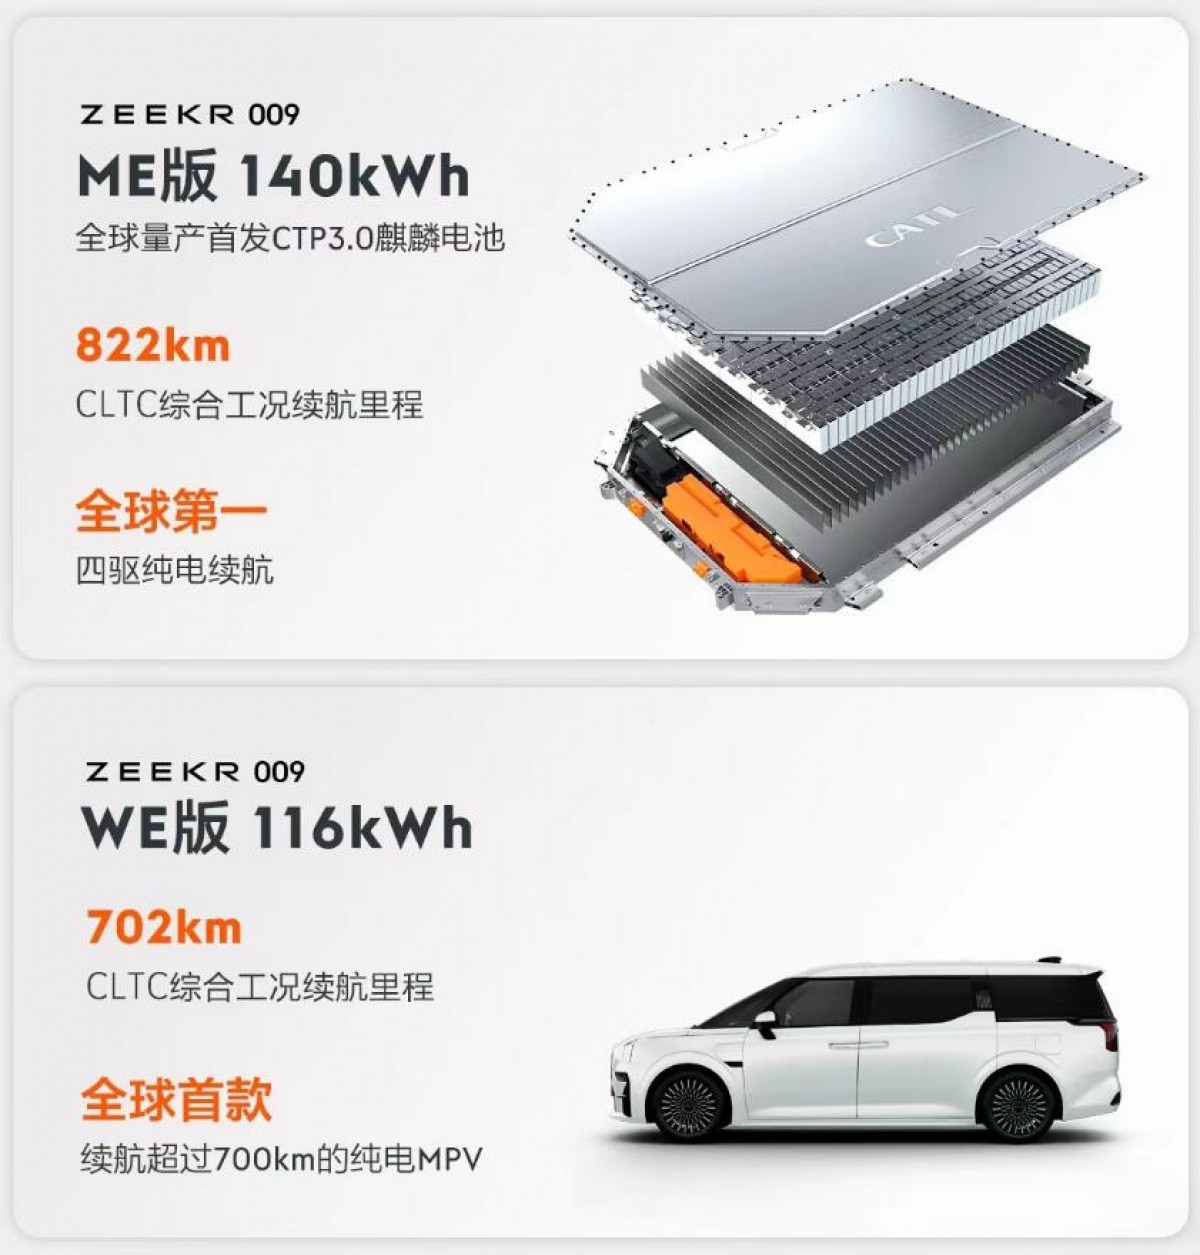 Zeekr 009 MPV launches with CATL 140kWh Qilin battery